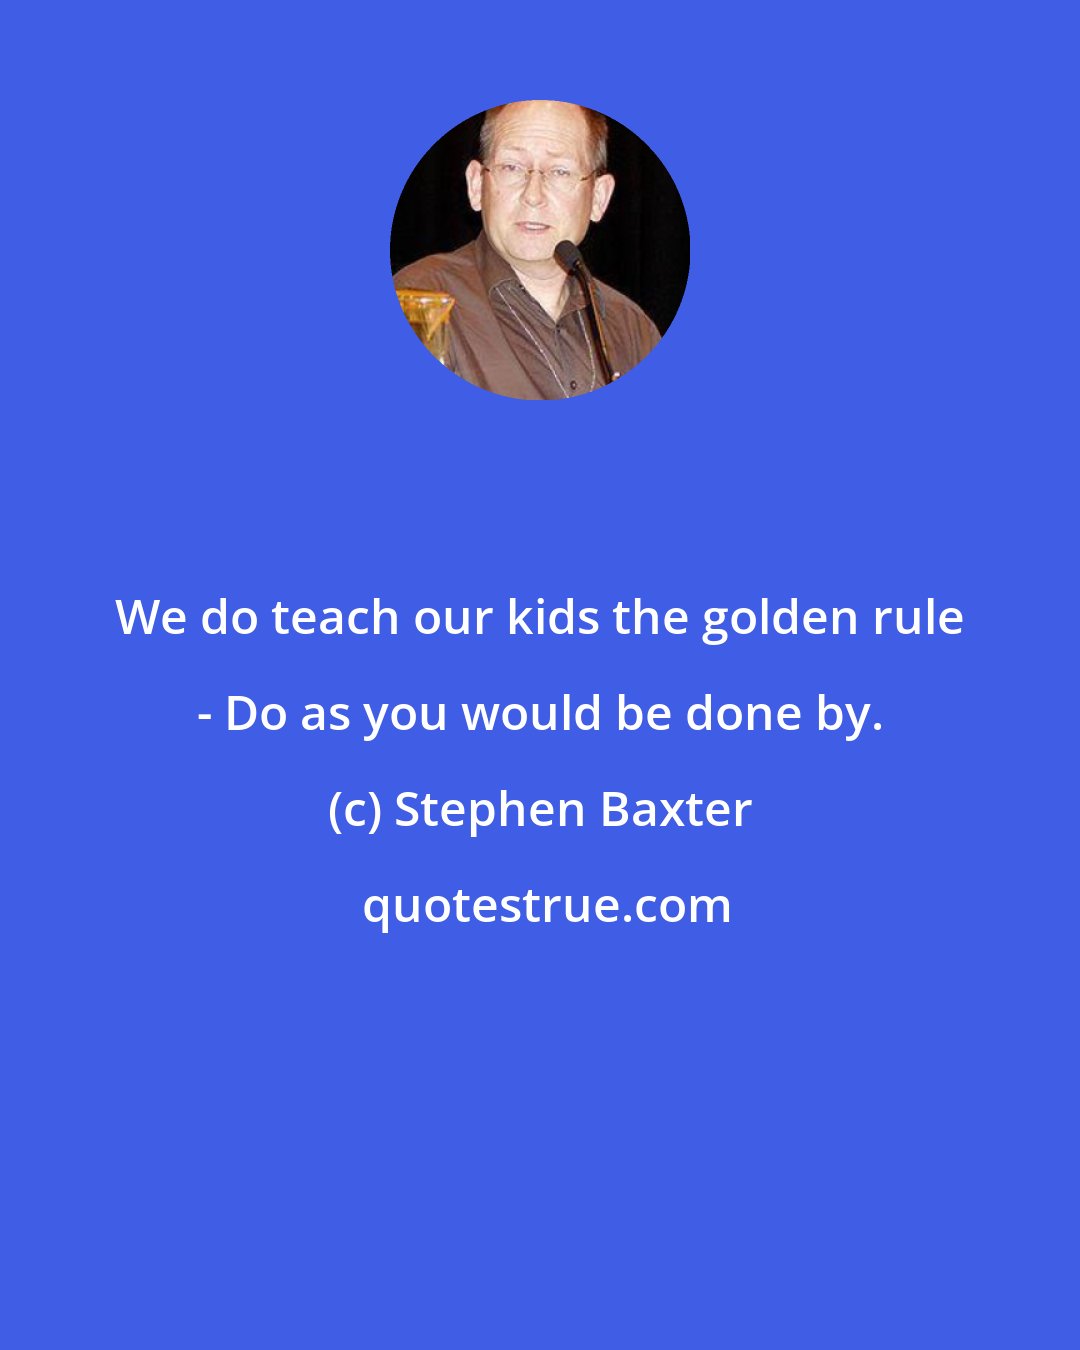 Stephen Baxter: We do teach our kids the golden rule - Do as you would be done by.